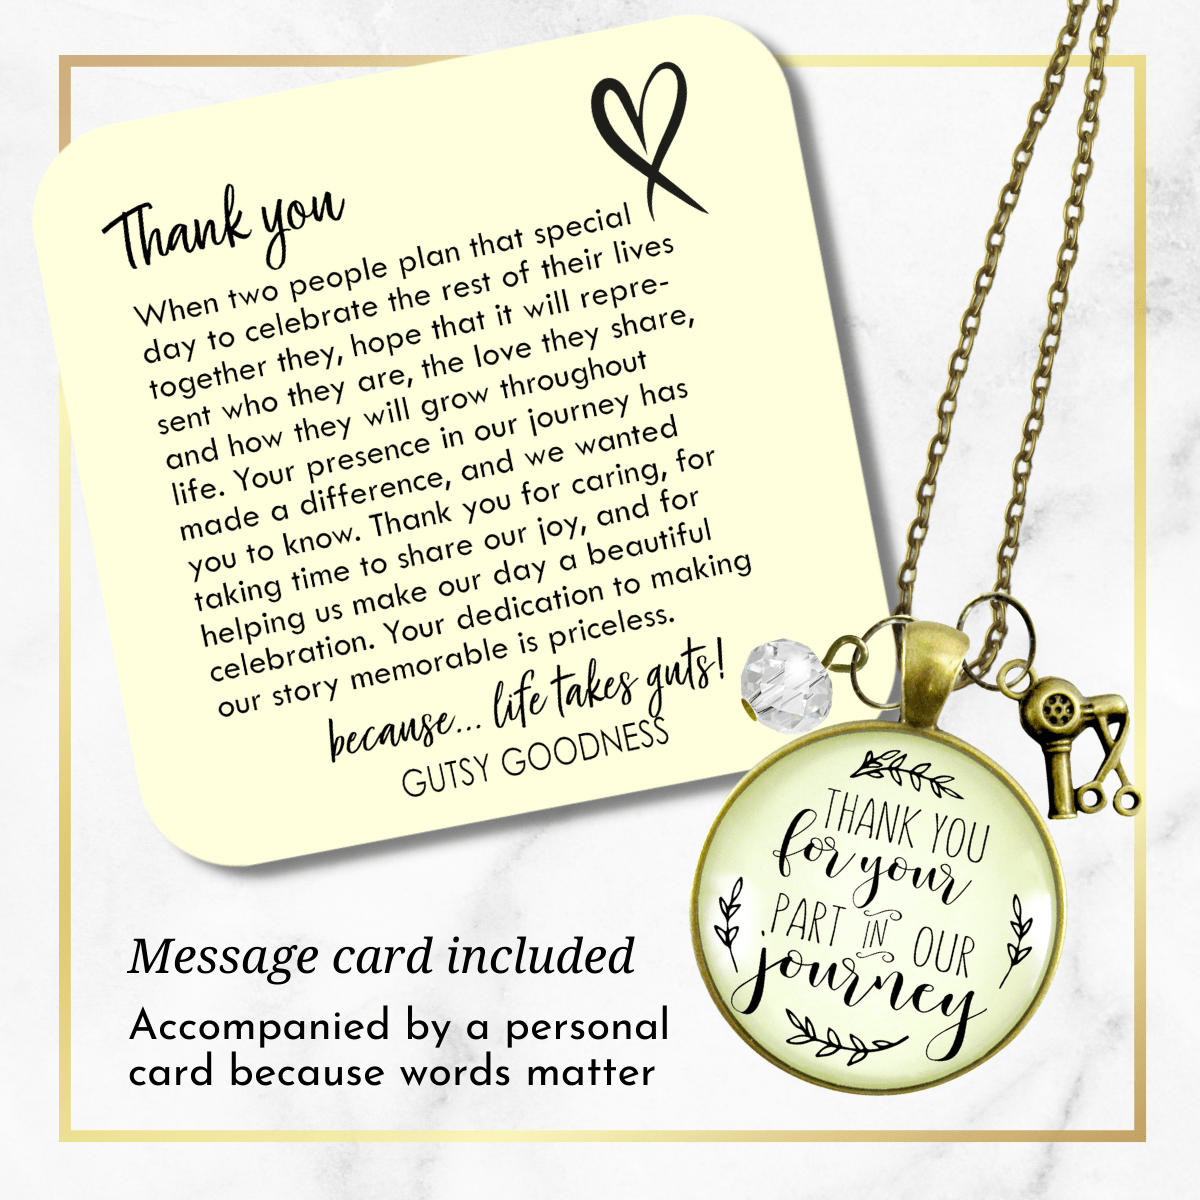 Gutsy Goodness Hairdresser Gift Necklace Thank You For Your Part For Stylist Charm - Gutsy Goodness Handmade Jewelry;Hairdresser Gift Necklace Thank You For Your Part For Stylist Charm - Gutsy Goodness Handmade Jewelry Gifts